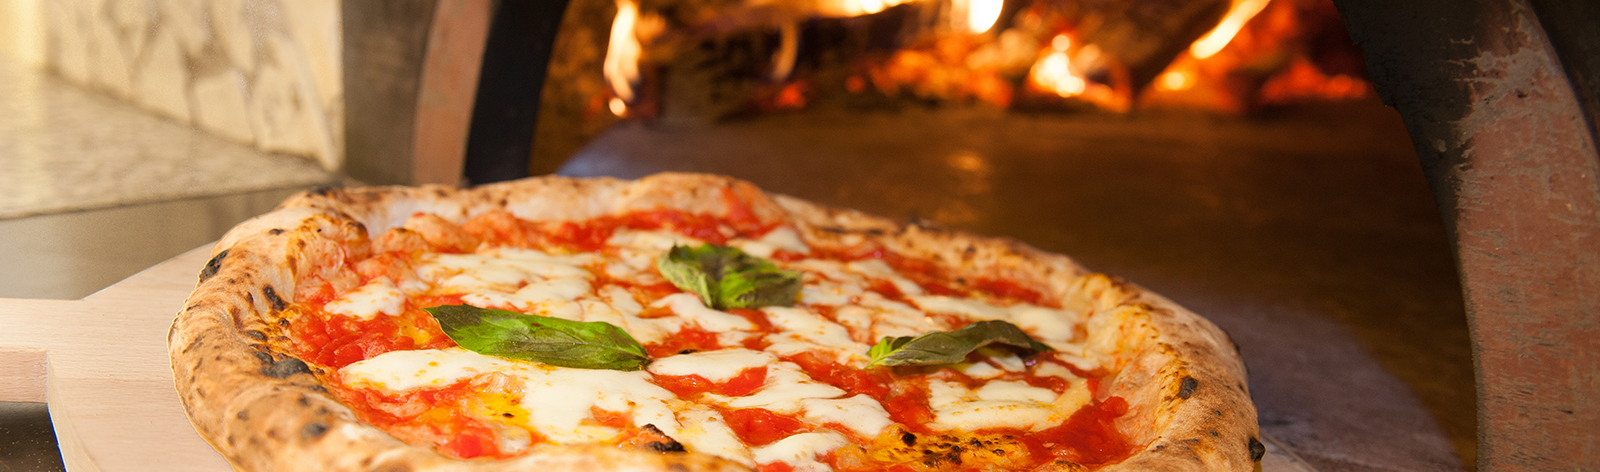 Margherita pizza fresh out of the wood-fired oven